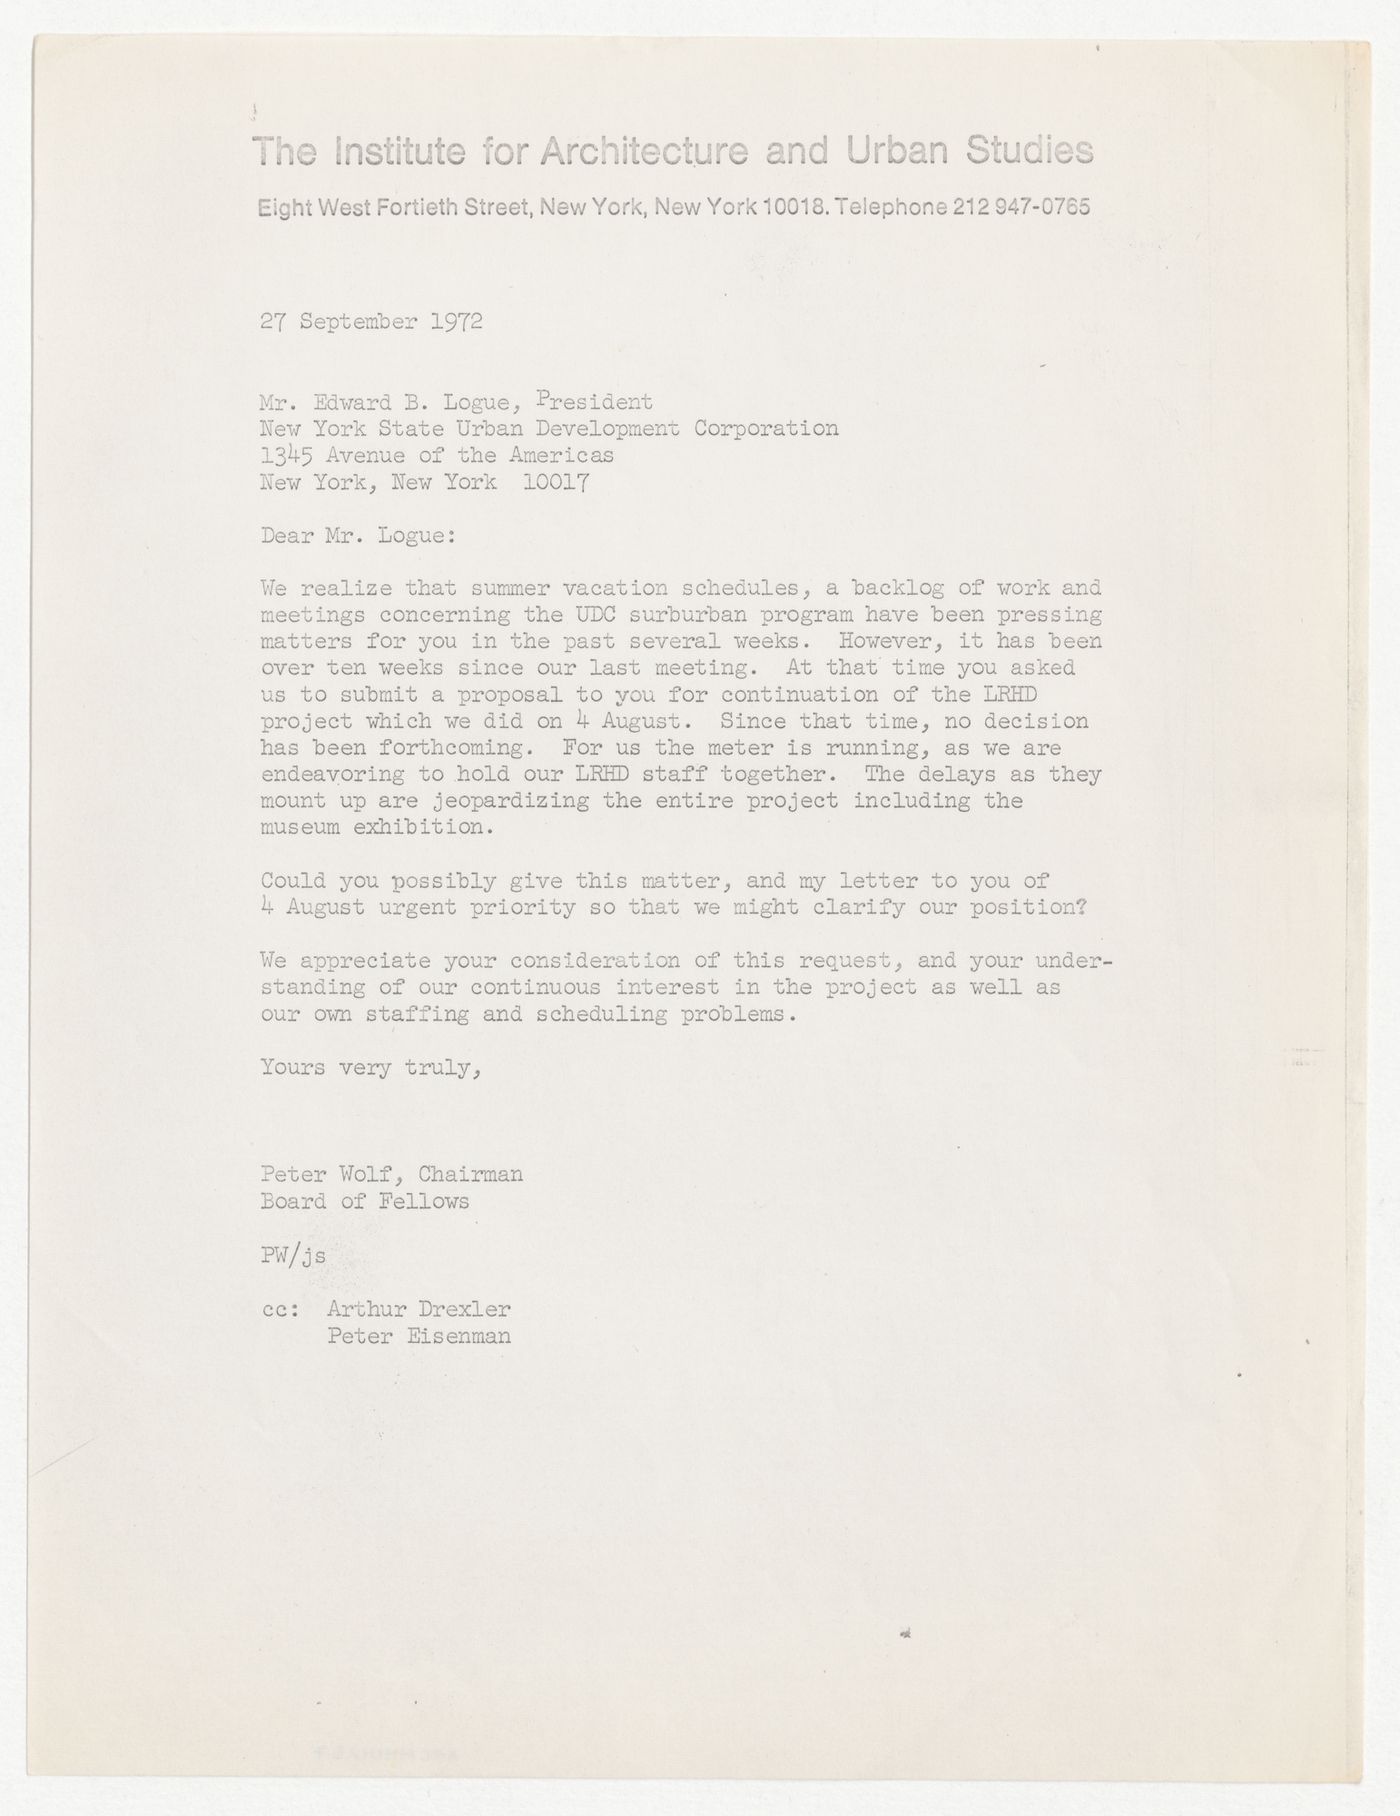 Letter from Peter Wolf to Edward J. Logue about Low-Rise High-Density (LRHD)